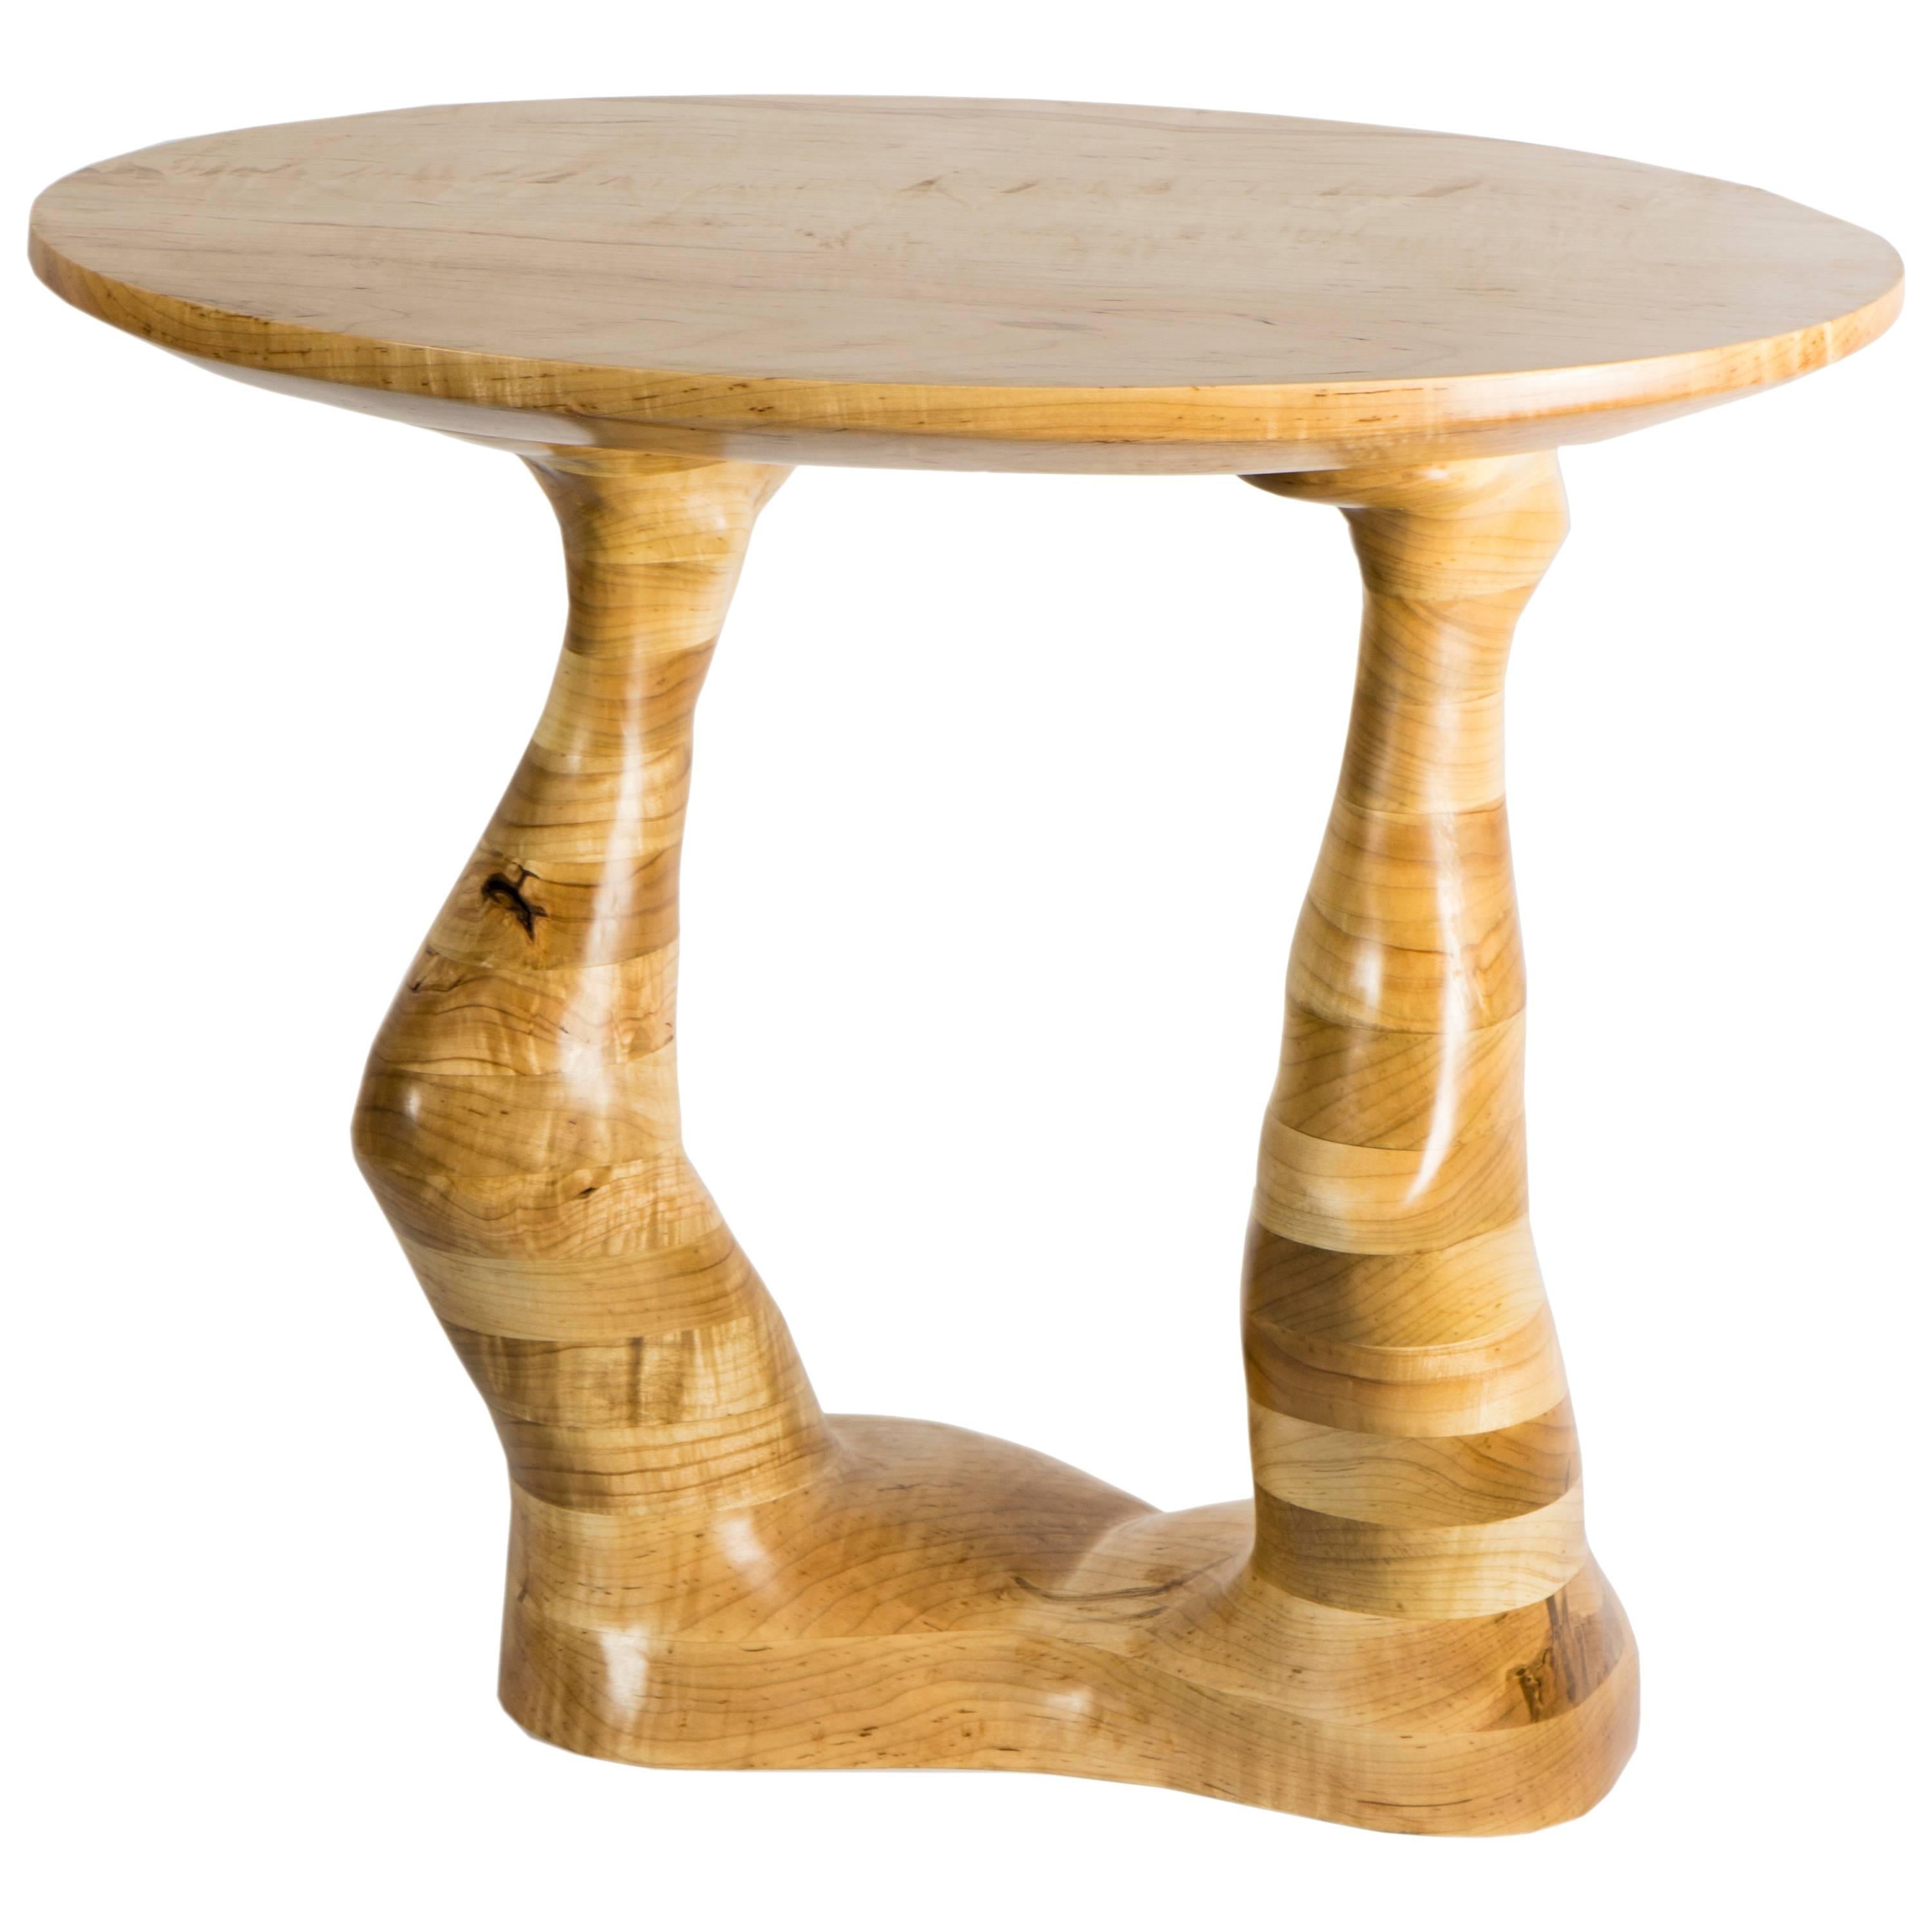 Form #1 hand carved wood sculptural table , ambrosia maple For Sale